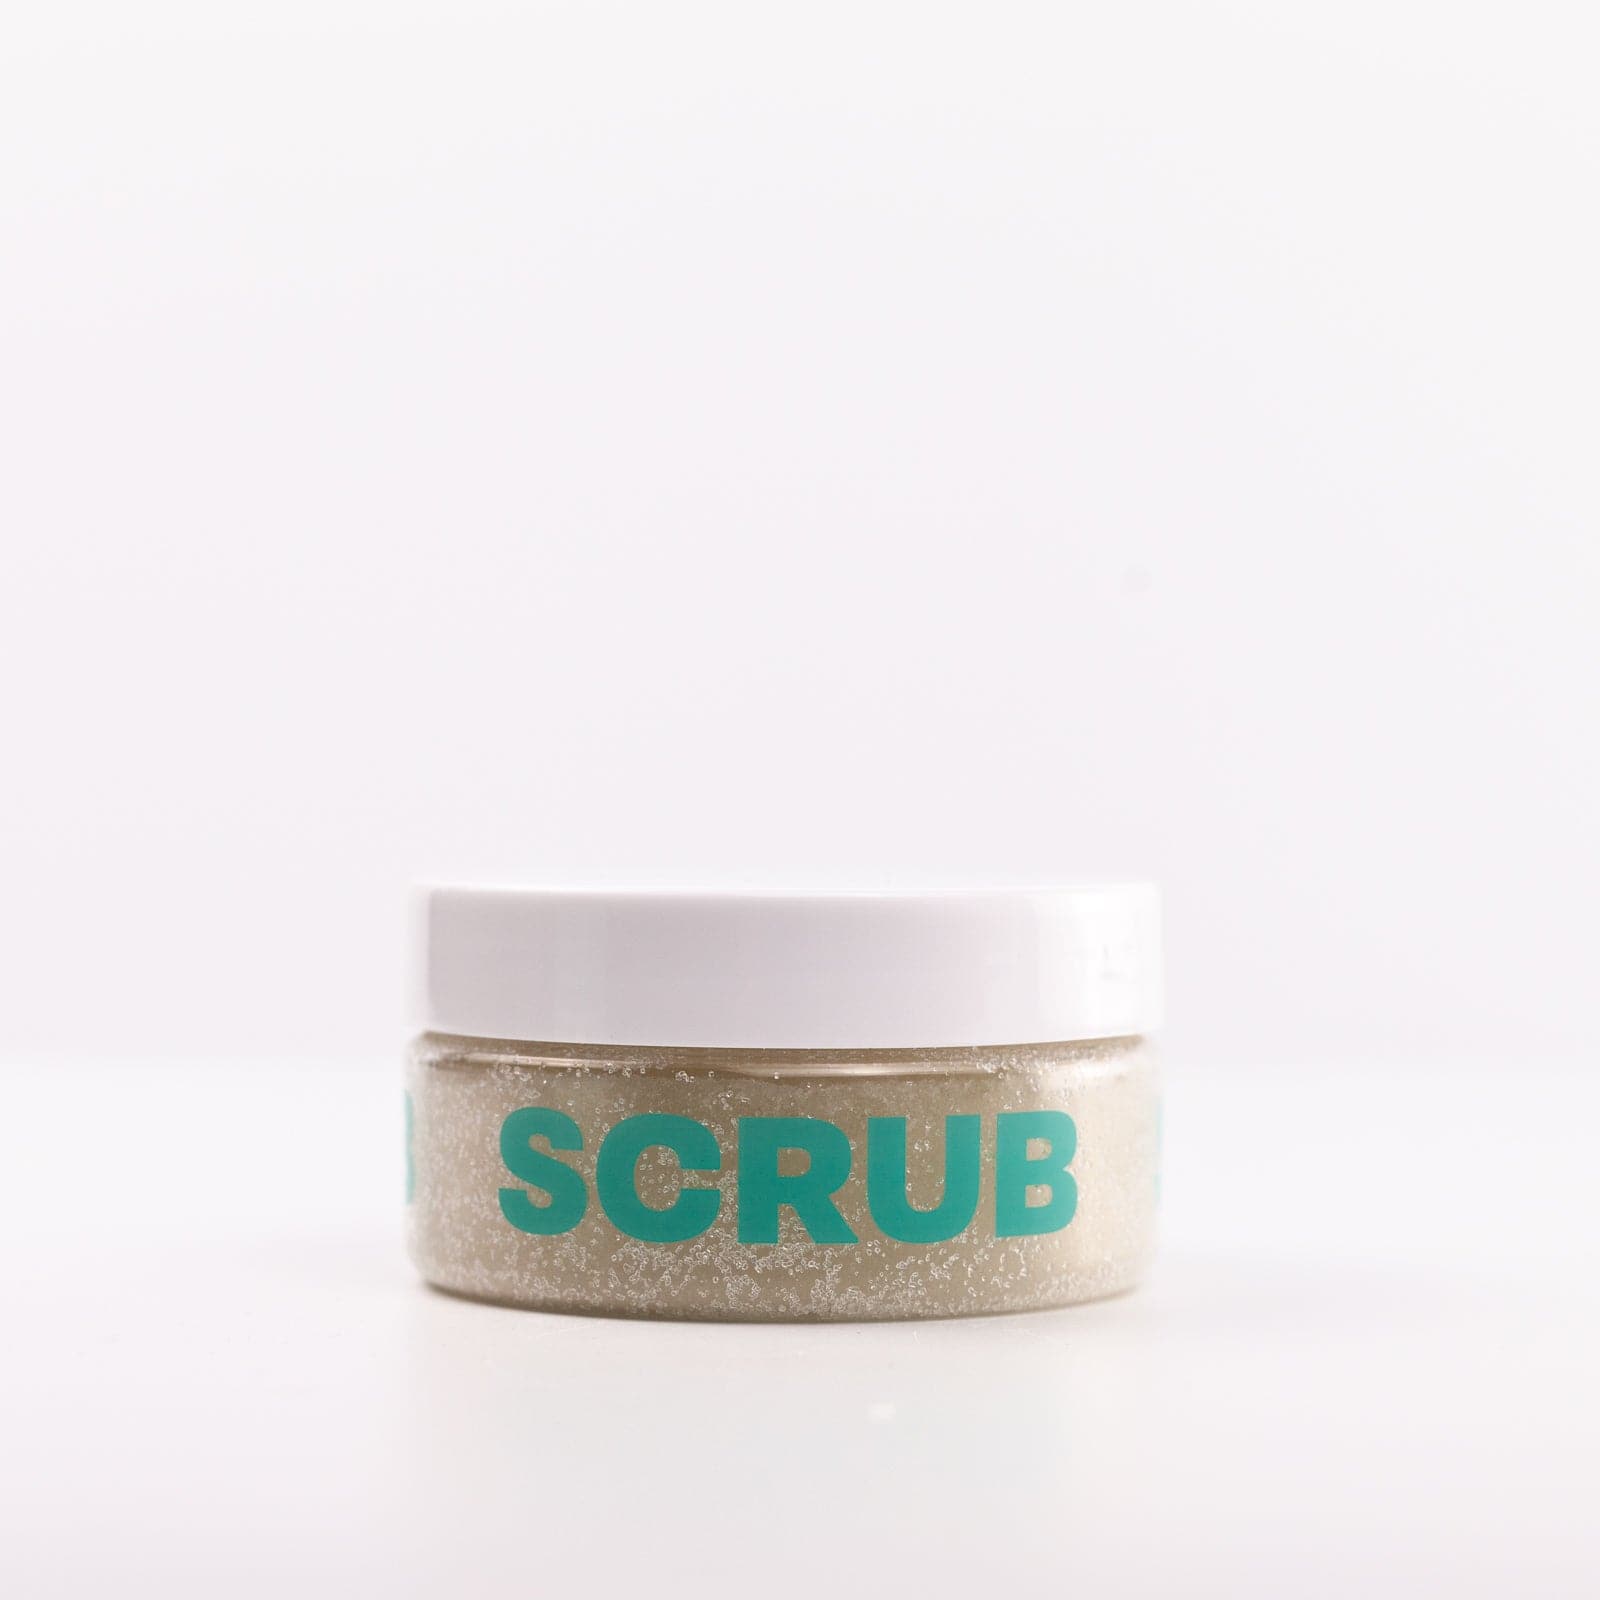 Body Scrub in container with white lid against white background 